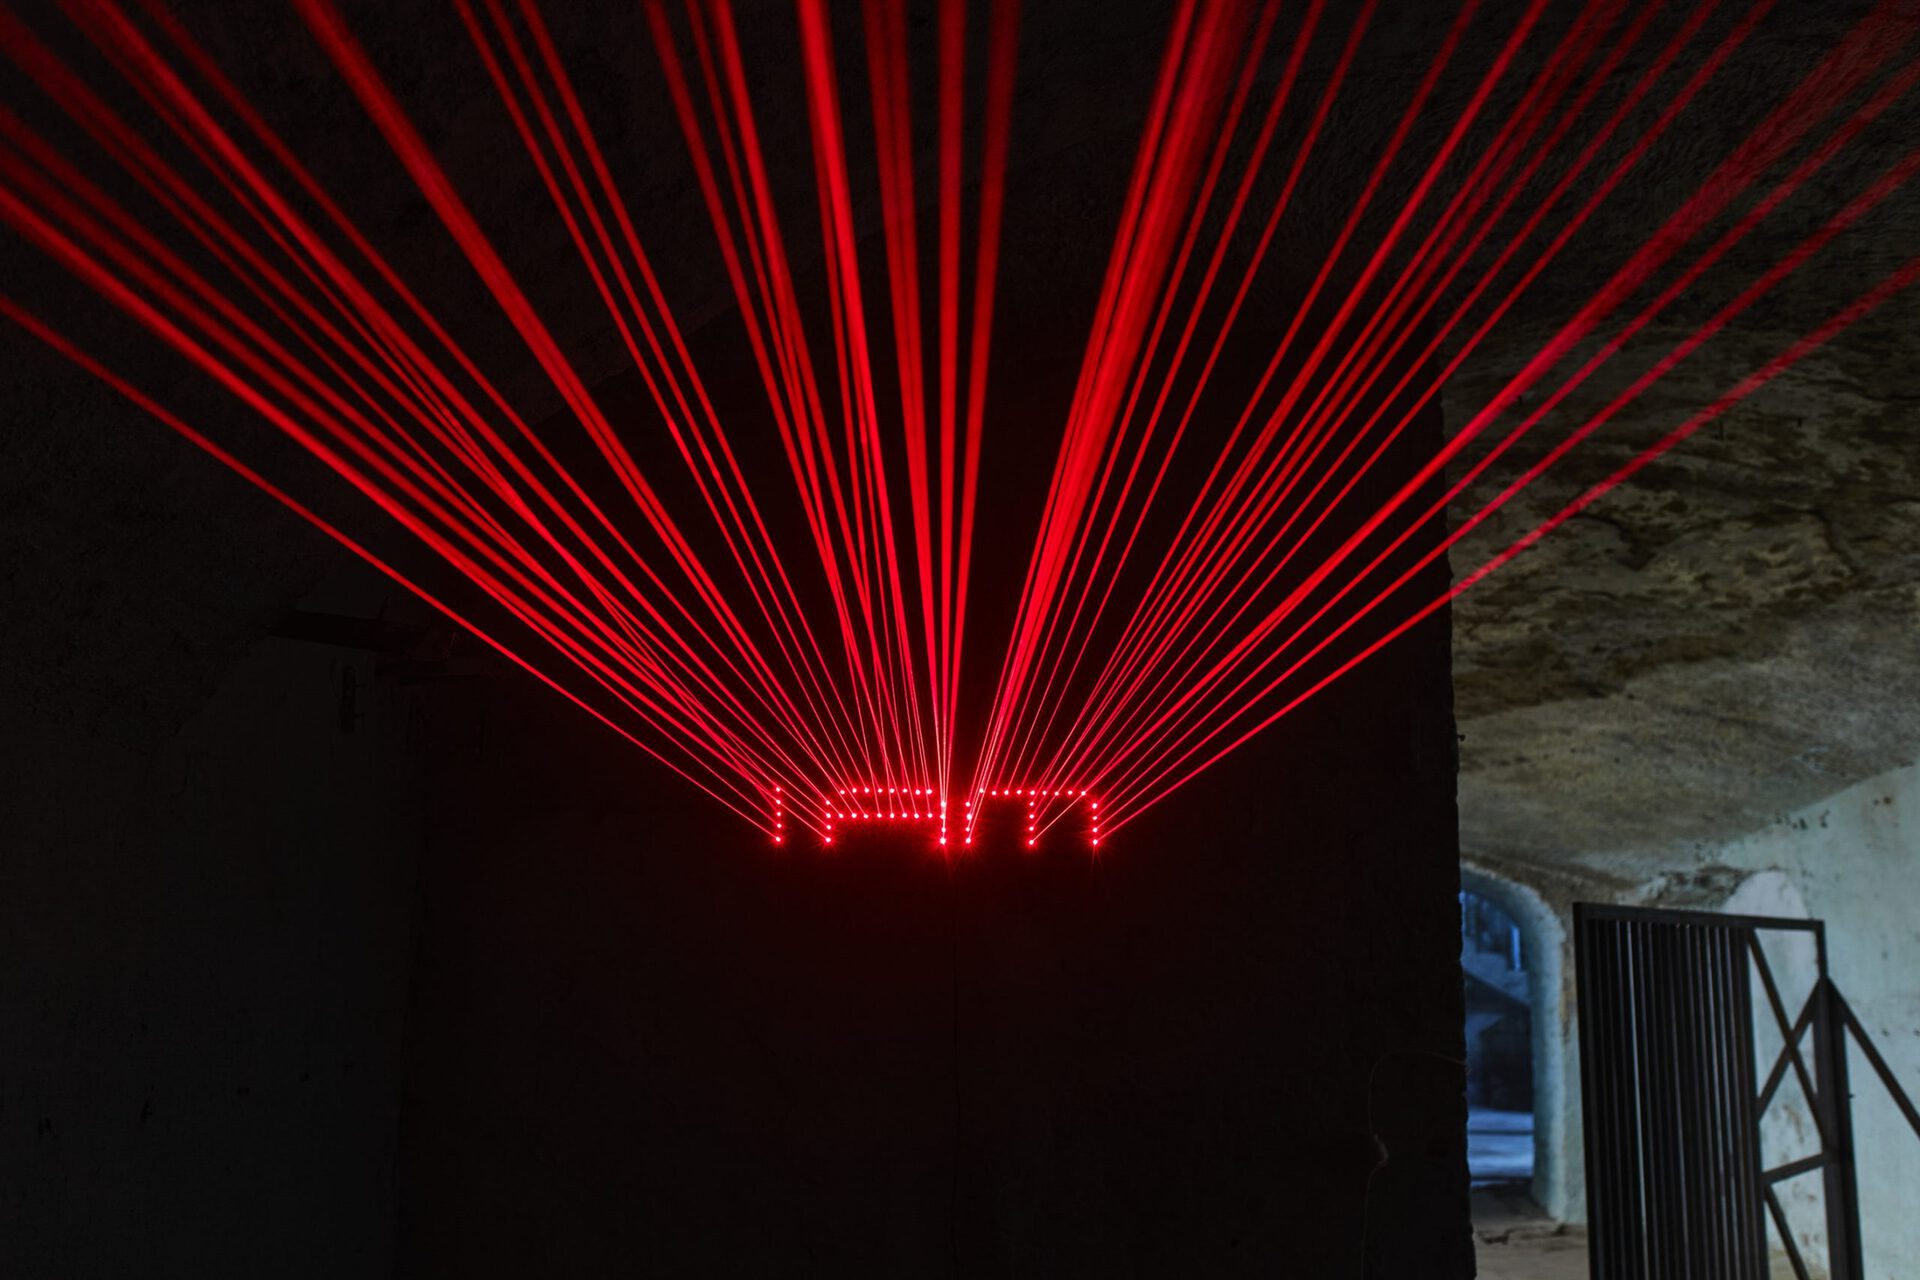 Lőrinc Borsos, TRINITY MODEL 2.0, 2009-2020, Light installation, Laser modules, metal structure, electronics, 120 x 20 x 30 cm, (From the Collection of The Evangelical Church Hungary)